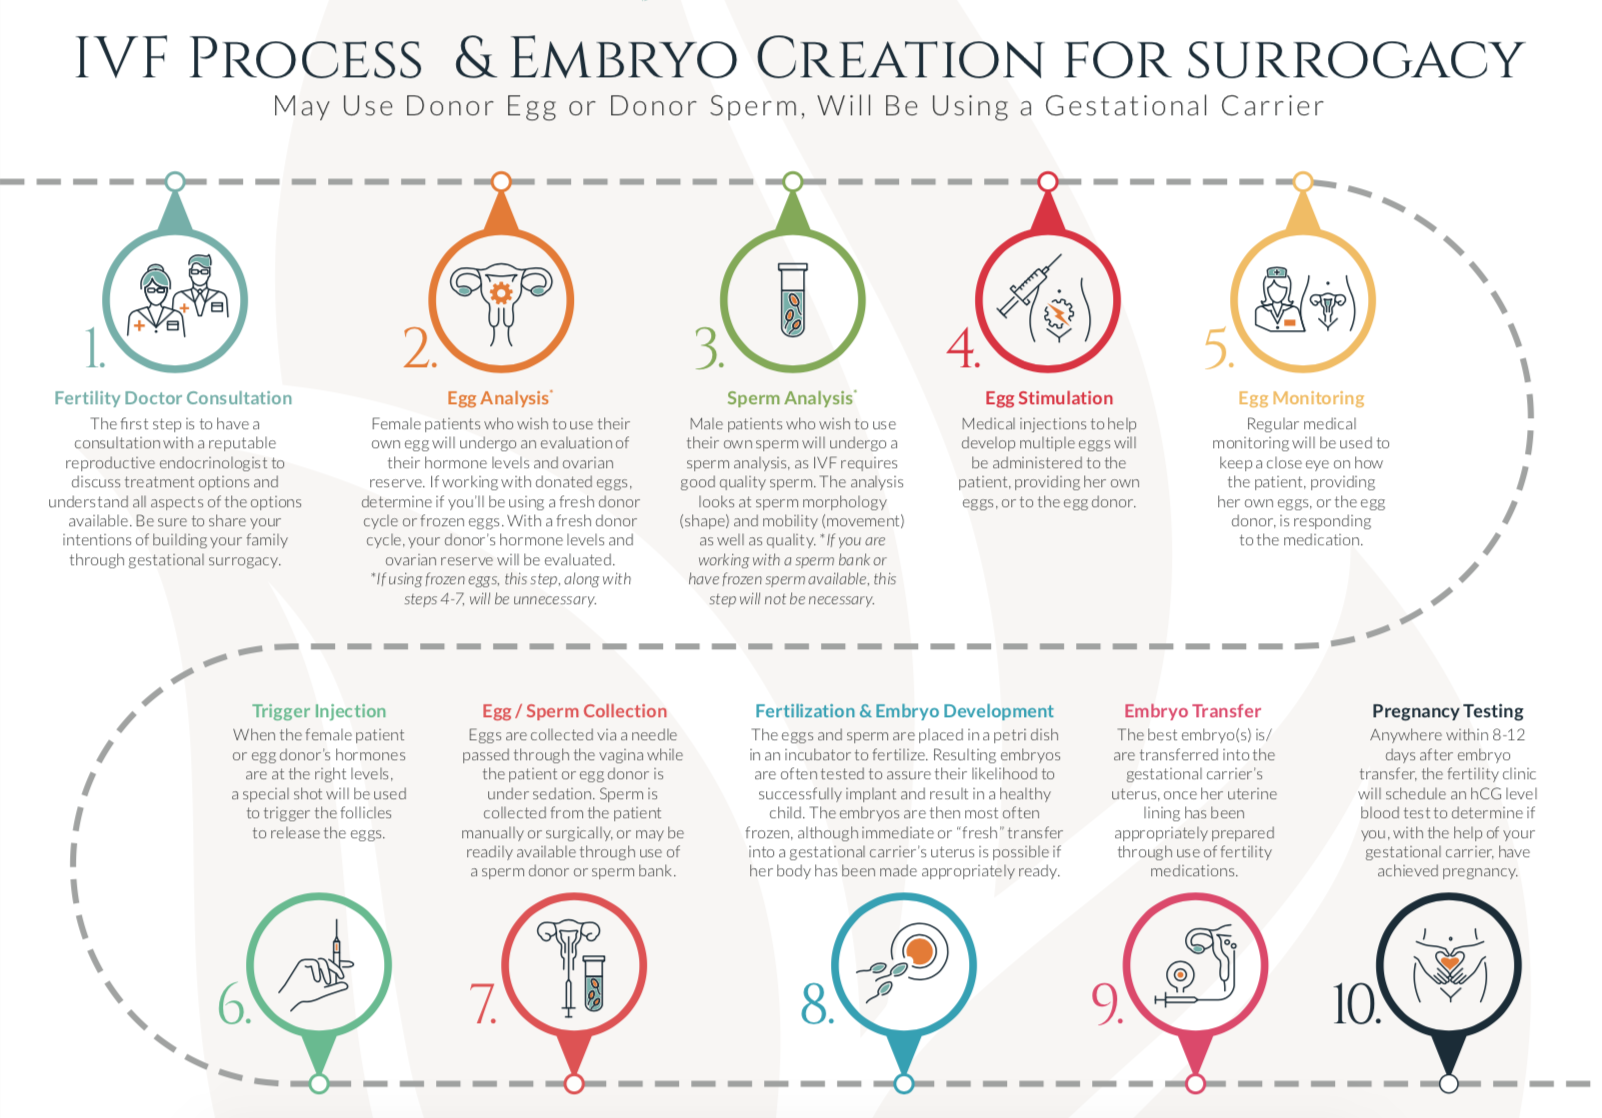 ivf process and embryo creation for surrogacy